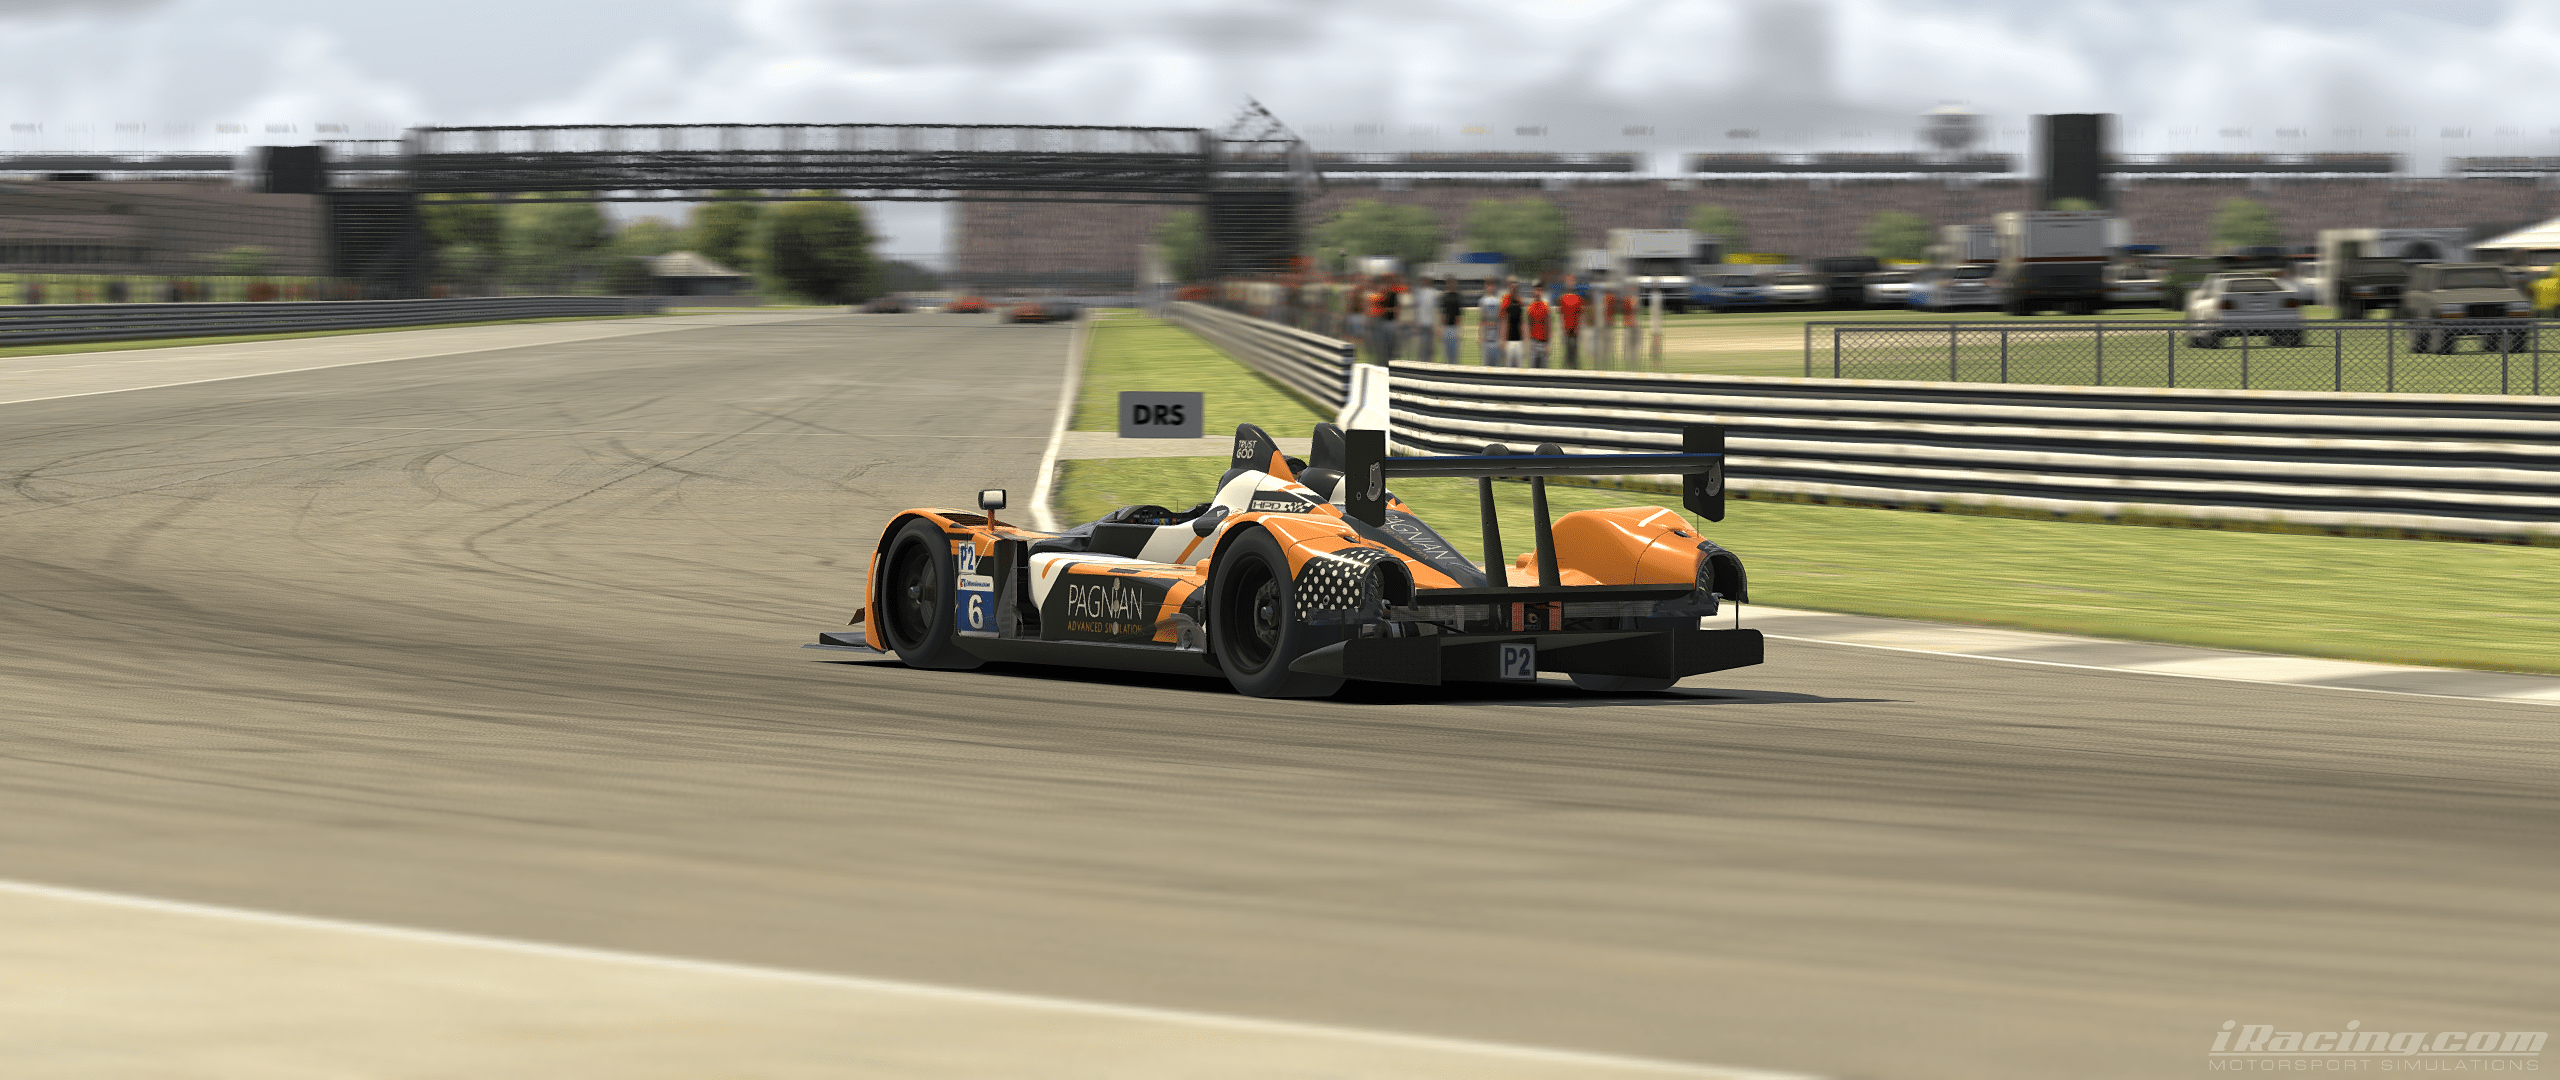 Winners on Debut! The Rev It Up Racing eSports Team Victorious at Indy